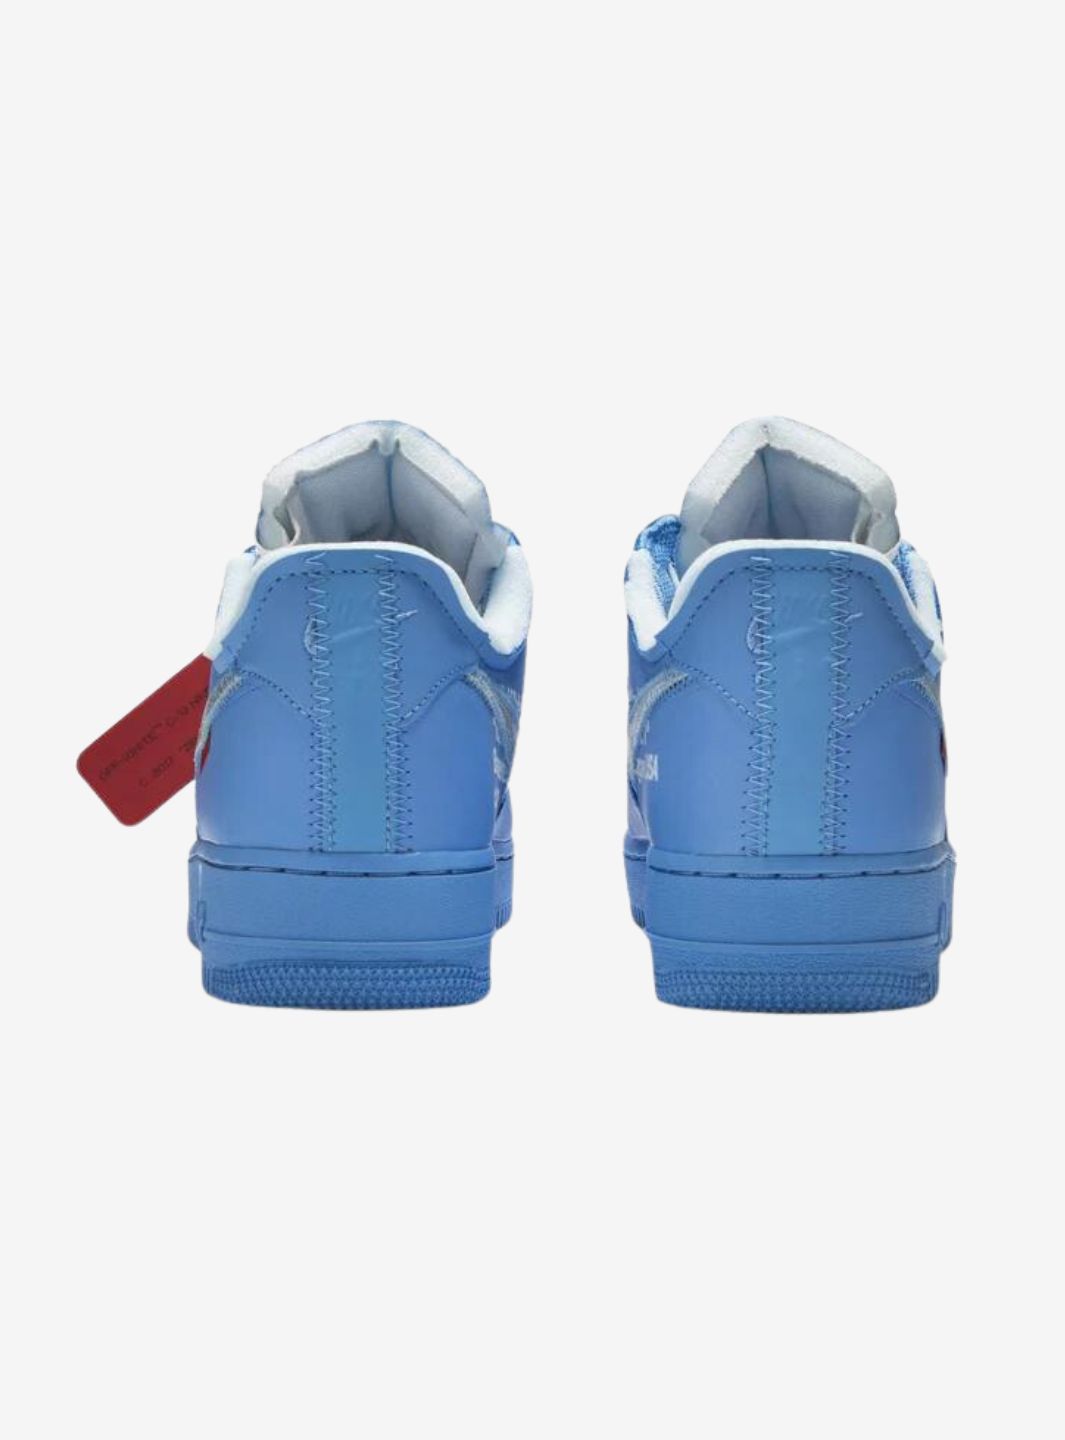 Nike Air Force 1 Low Off-White MCA University Blue - CI1173-400 | ResellZone